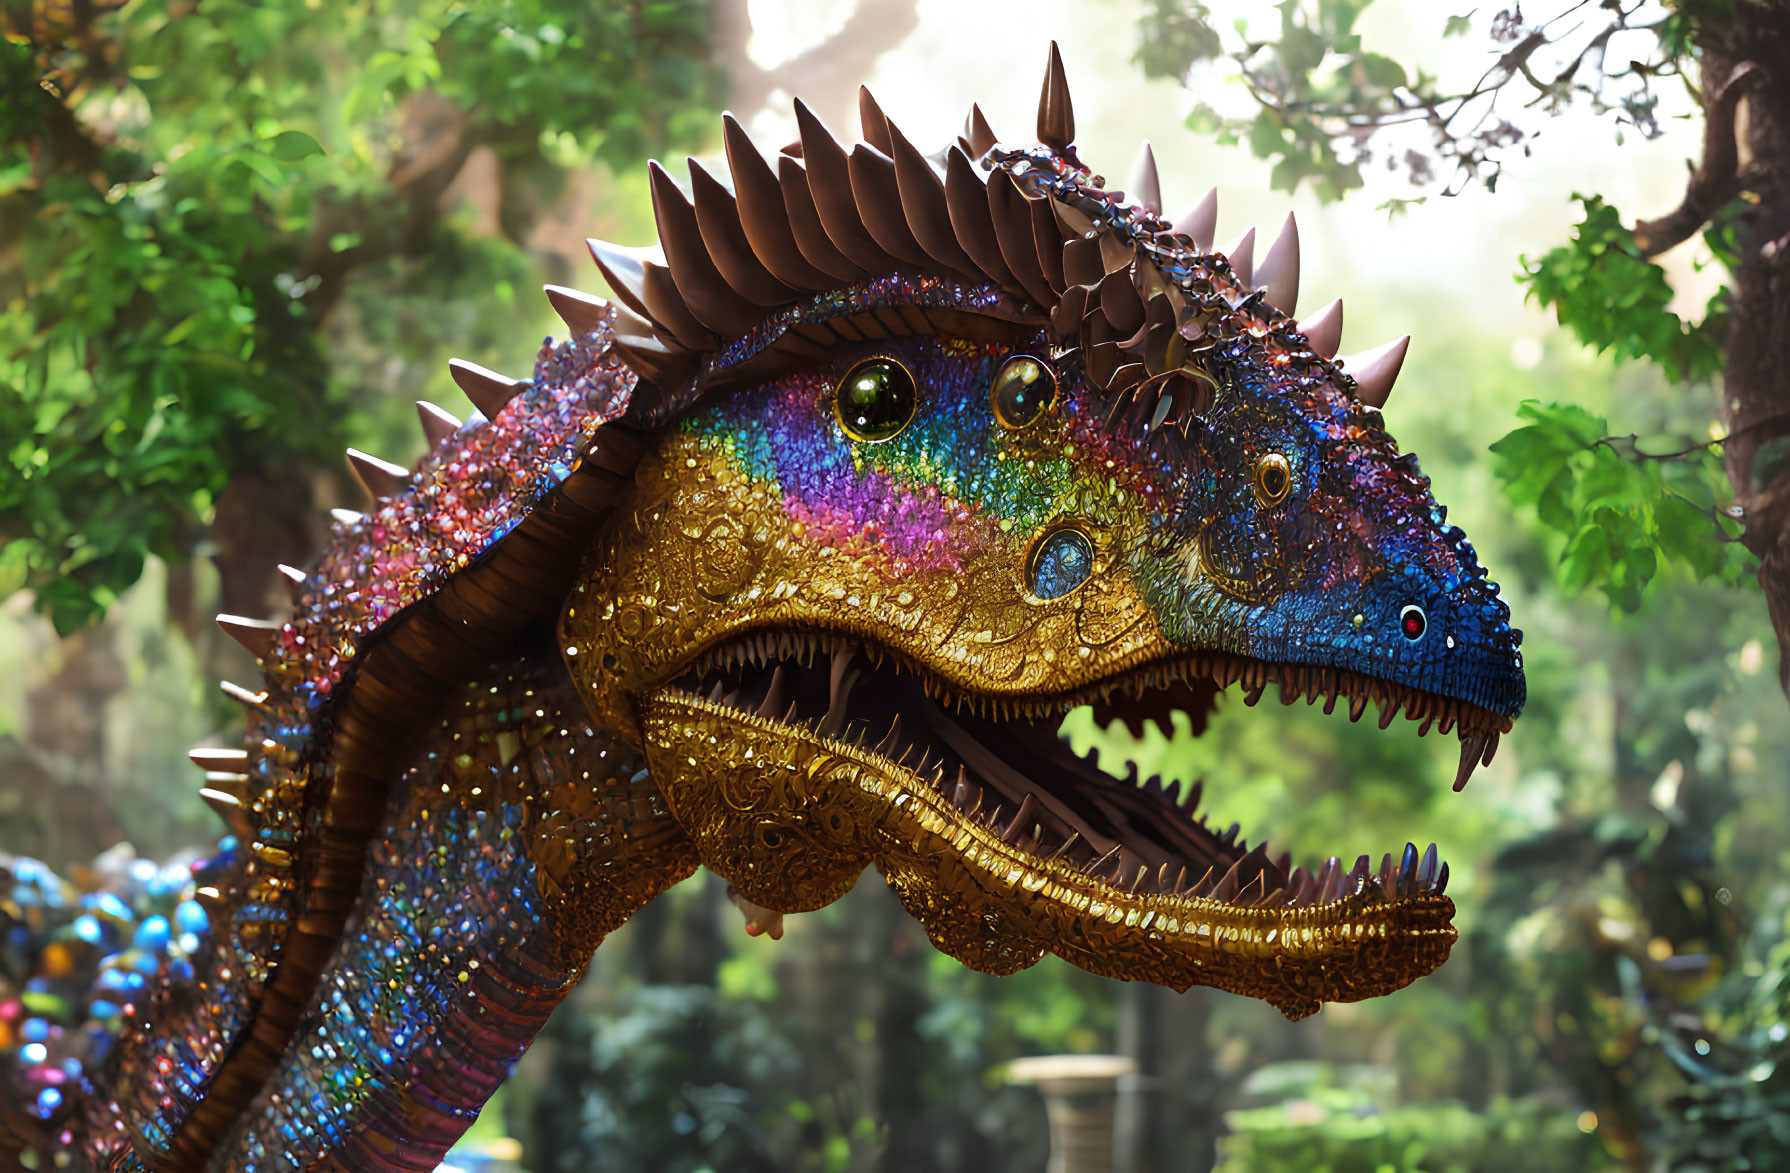 Colorful Dragon Creature with Glittering Scales in Forest Setting